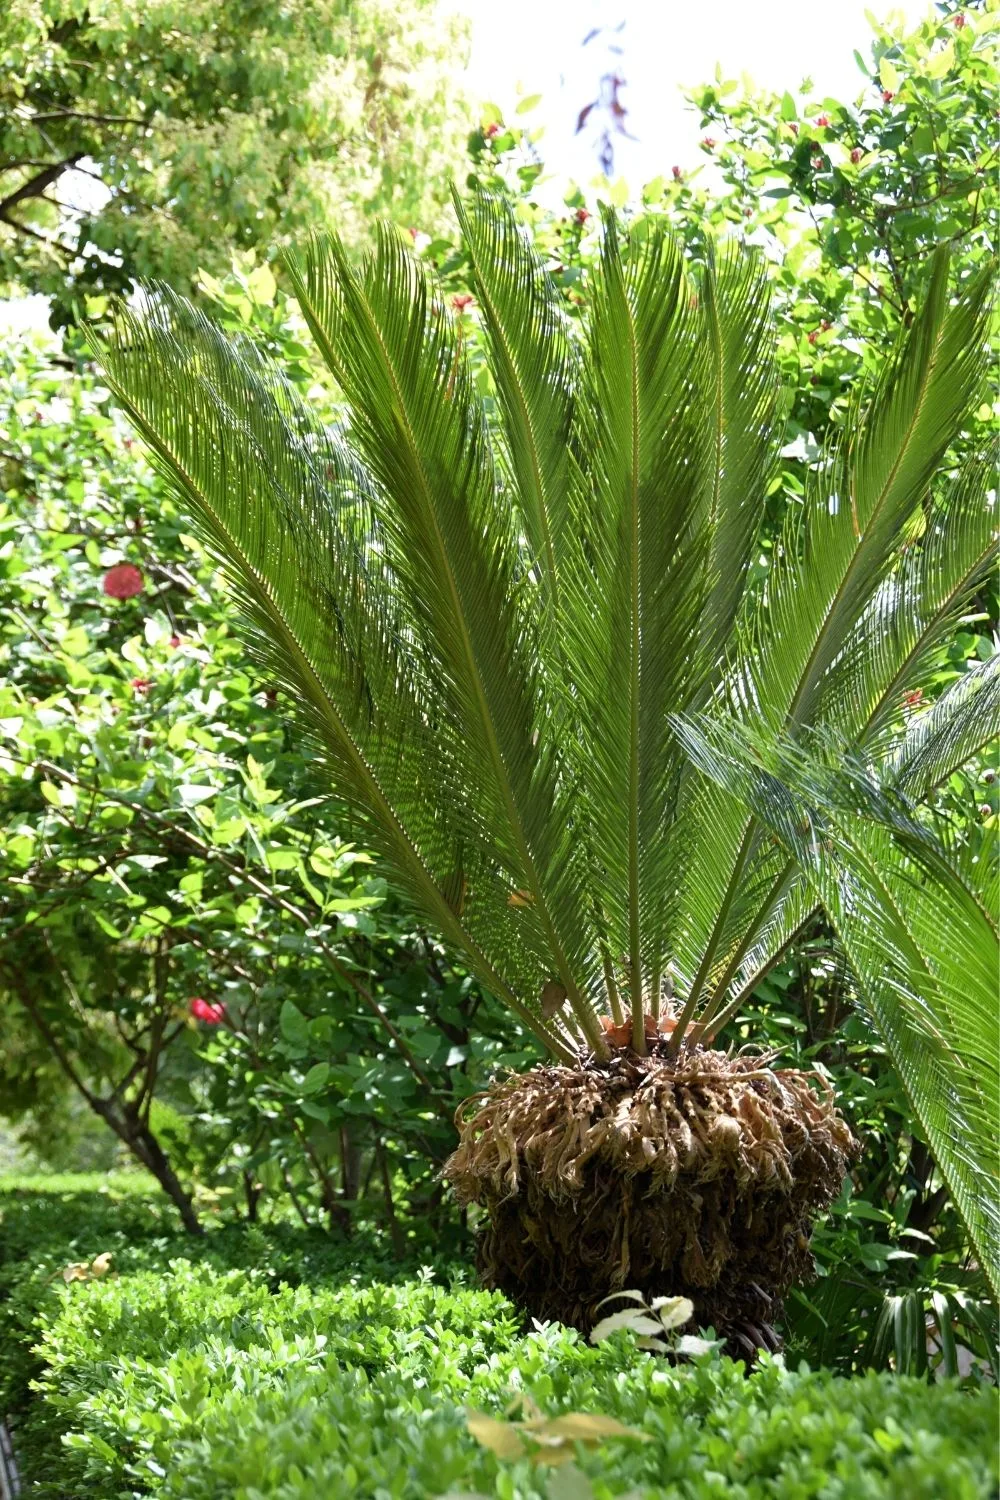 Sago Palm (Cycas revoluta) appreciates being placed in an area receiving bright, filtered sunlight